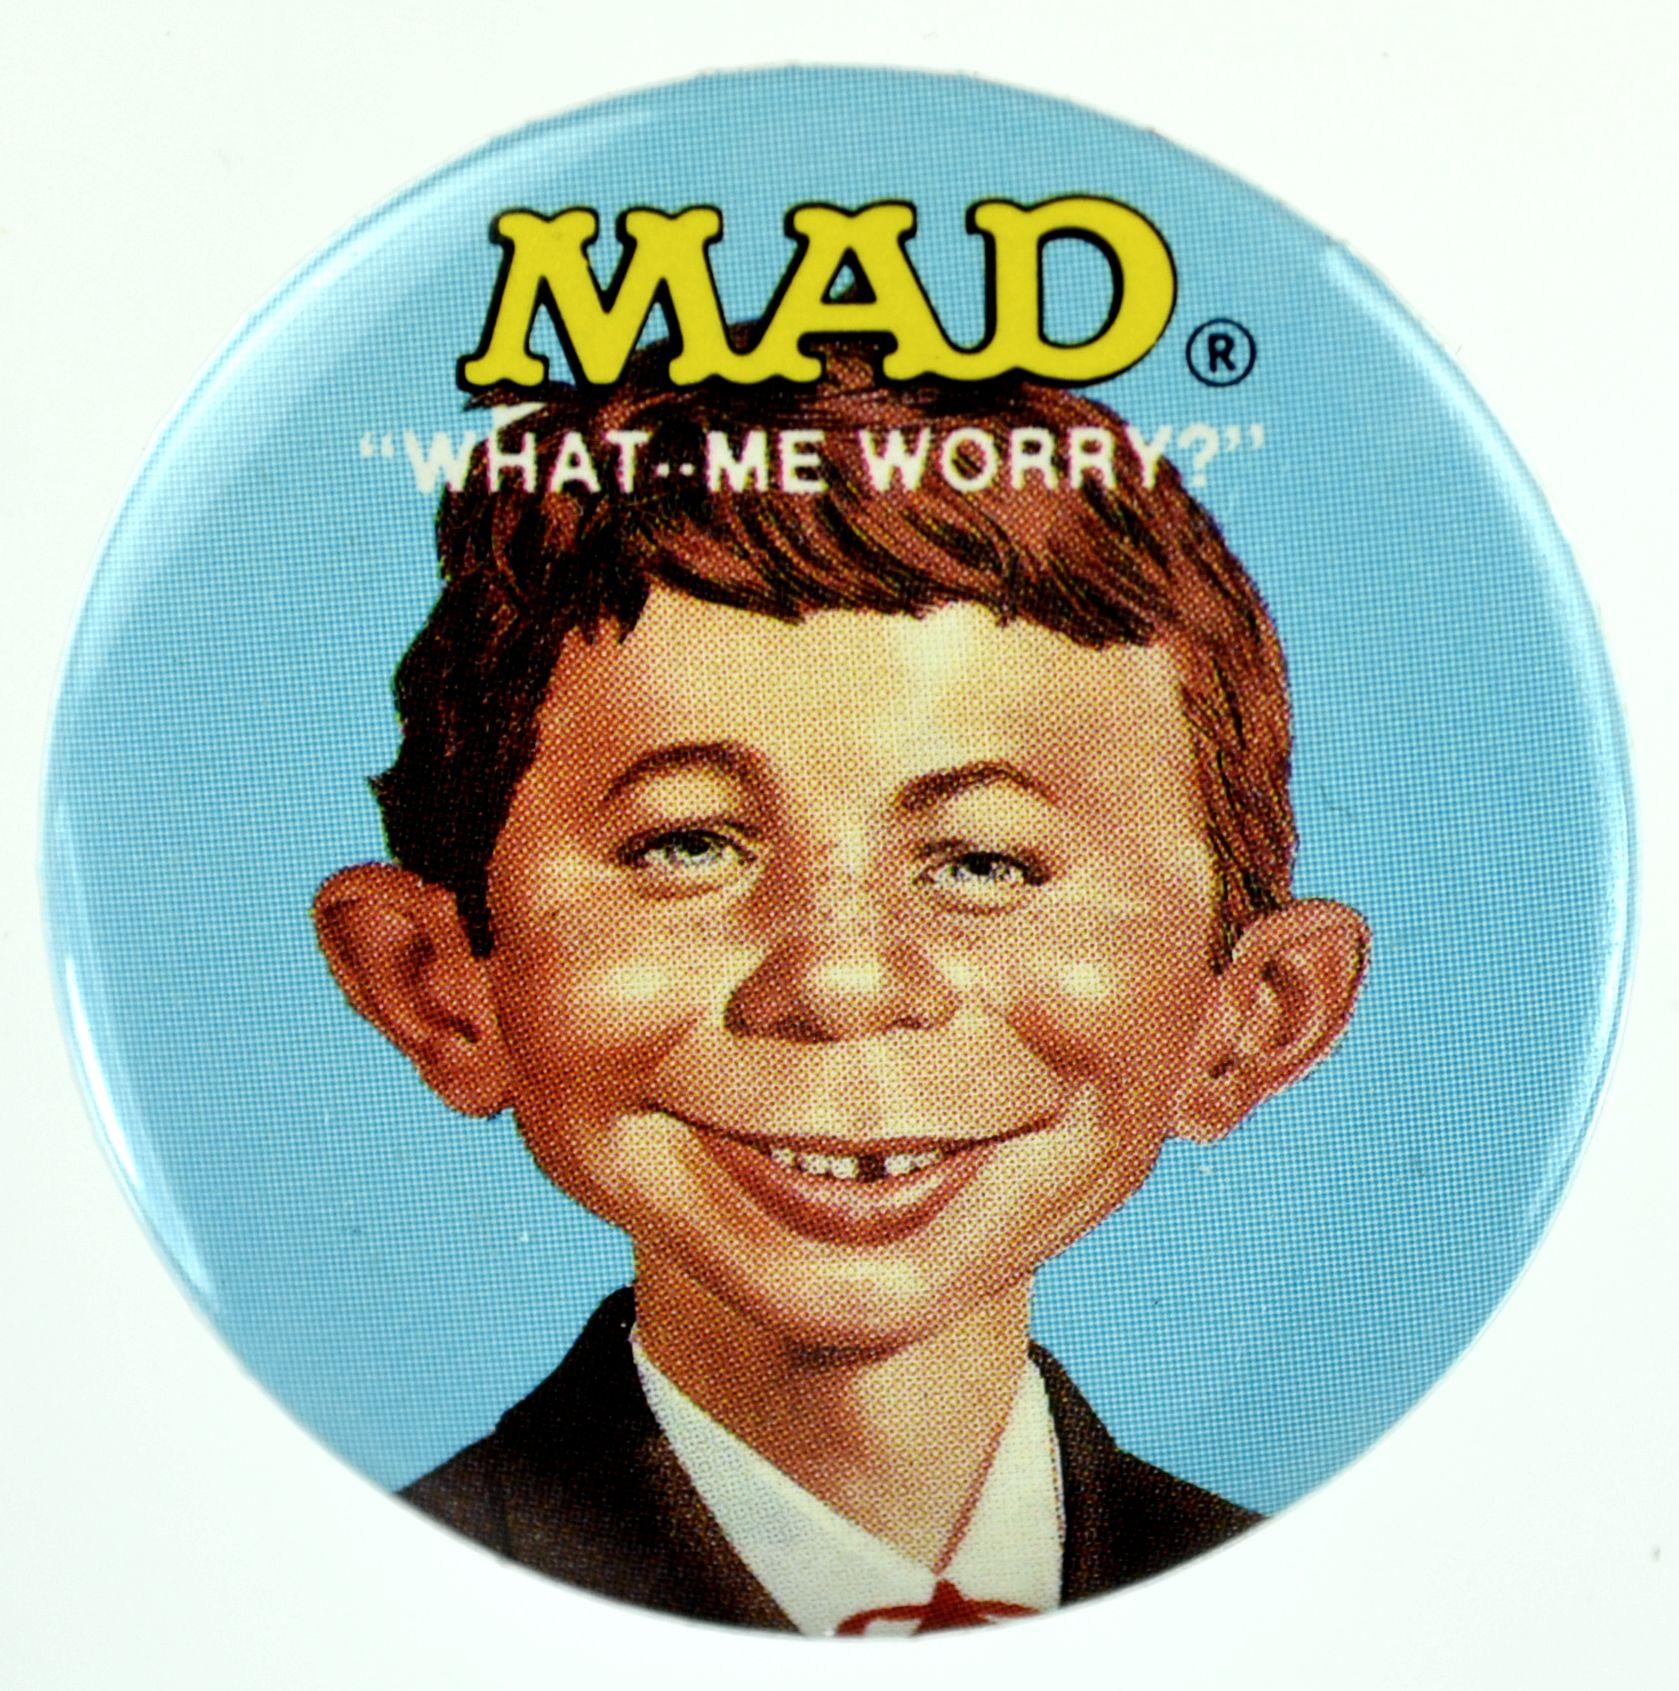 Today, we recognize New Boy and James T. Powers as Alfred E. Neuman